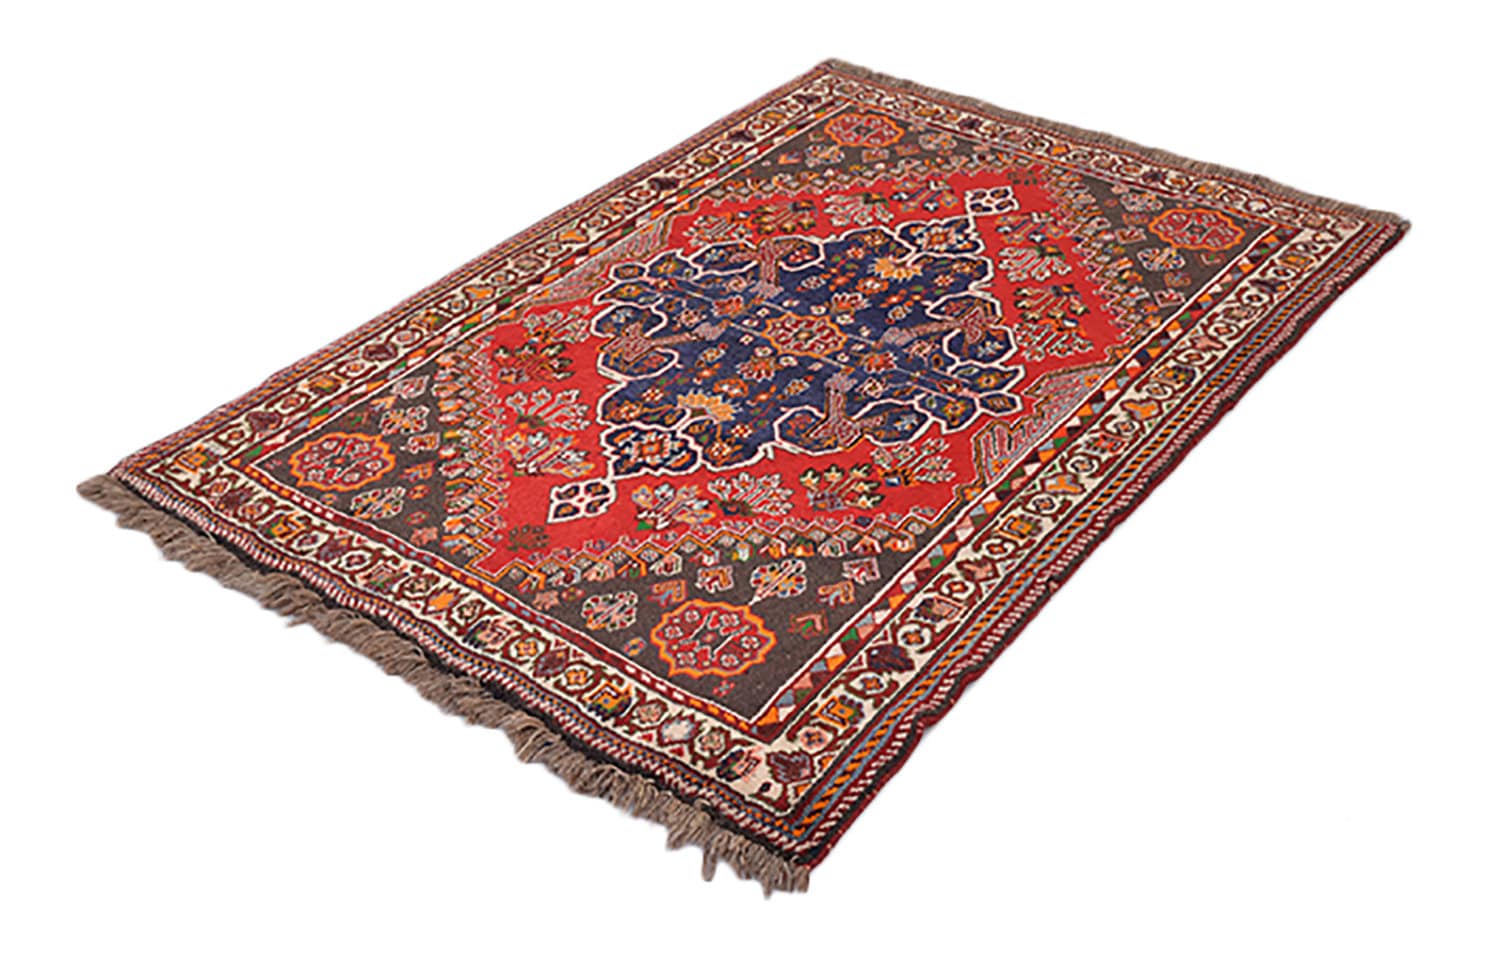 Red Bohemian 4 x 5 Rug  | Geometric Vintage Wool Rug | Tribal Persian Hand Knotted Bright Medallion Rug